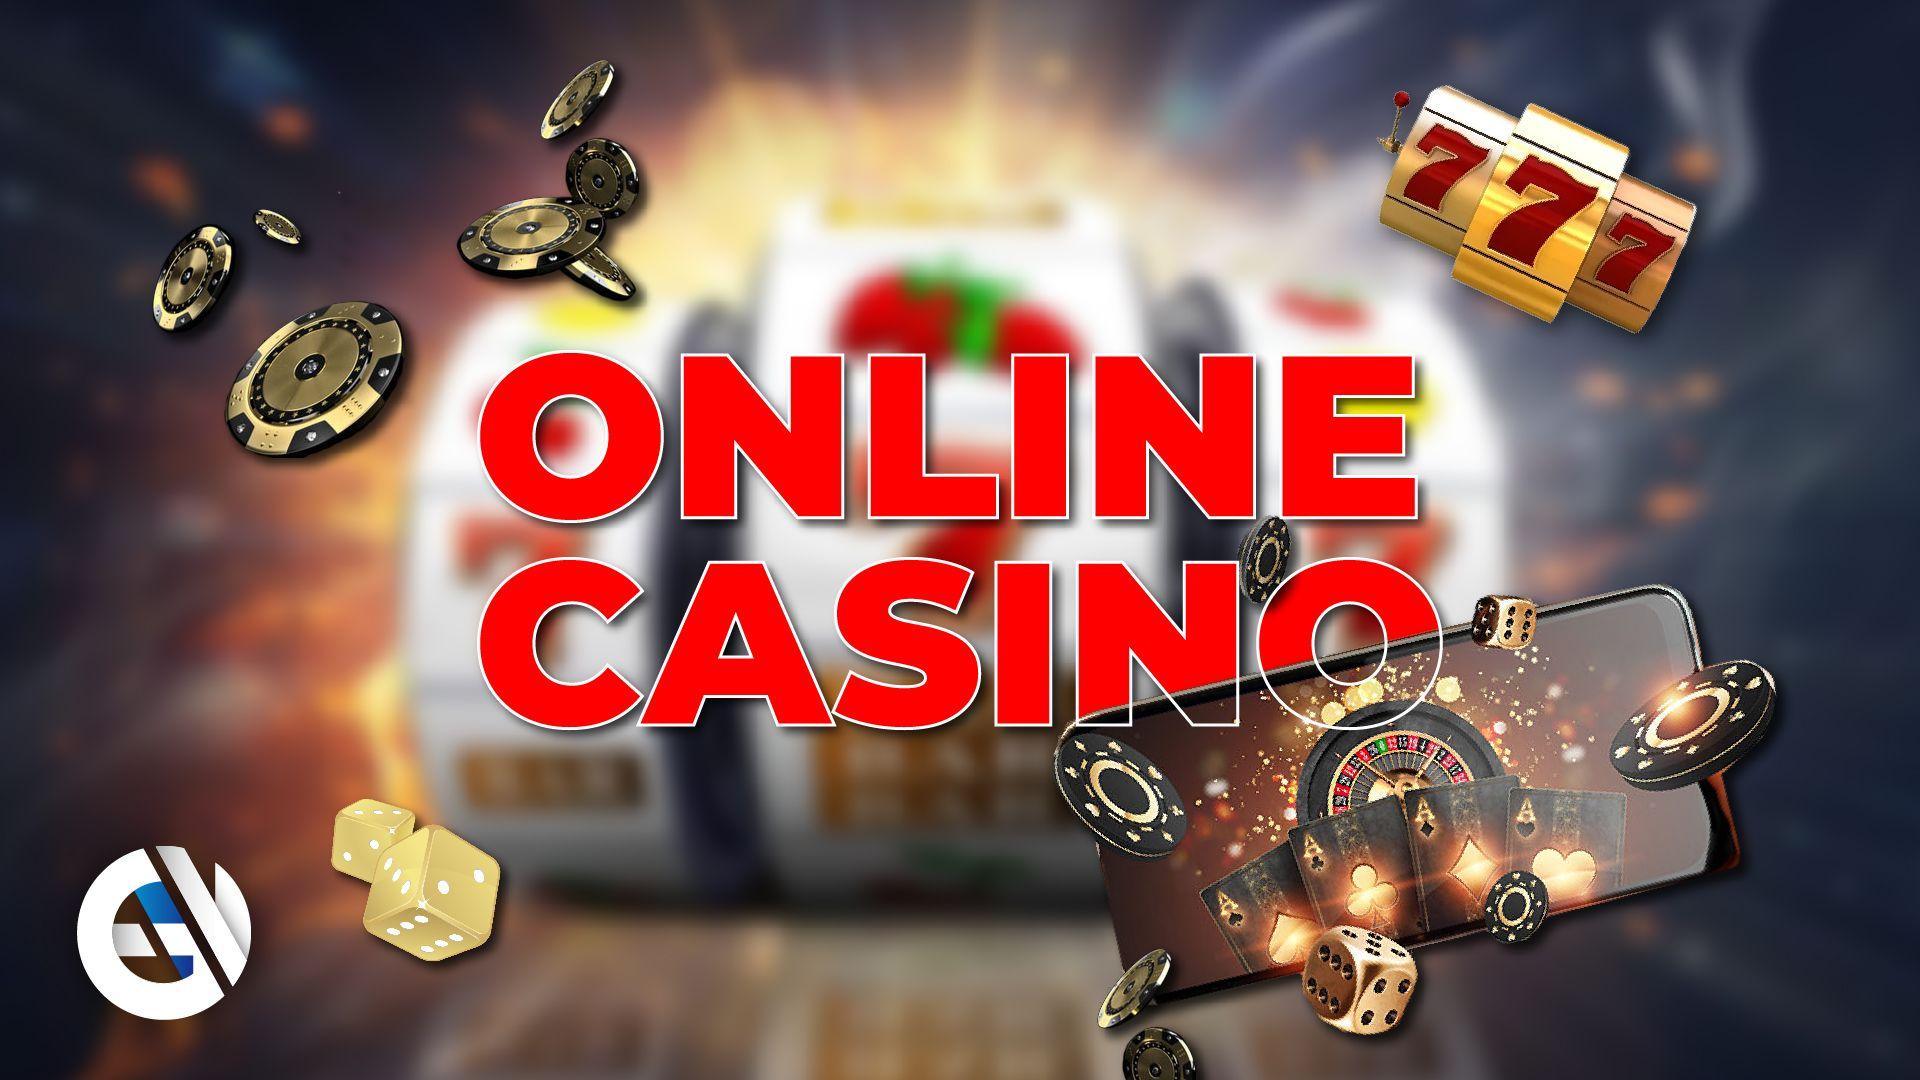 Online Casino Security: how to verify your gaming experience? -, Gaming Blog